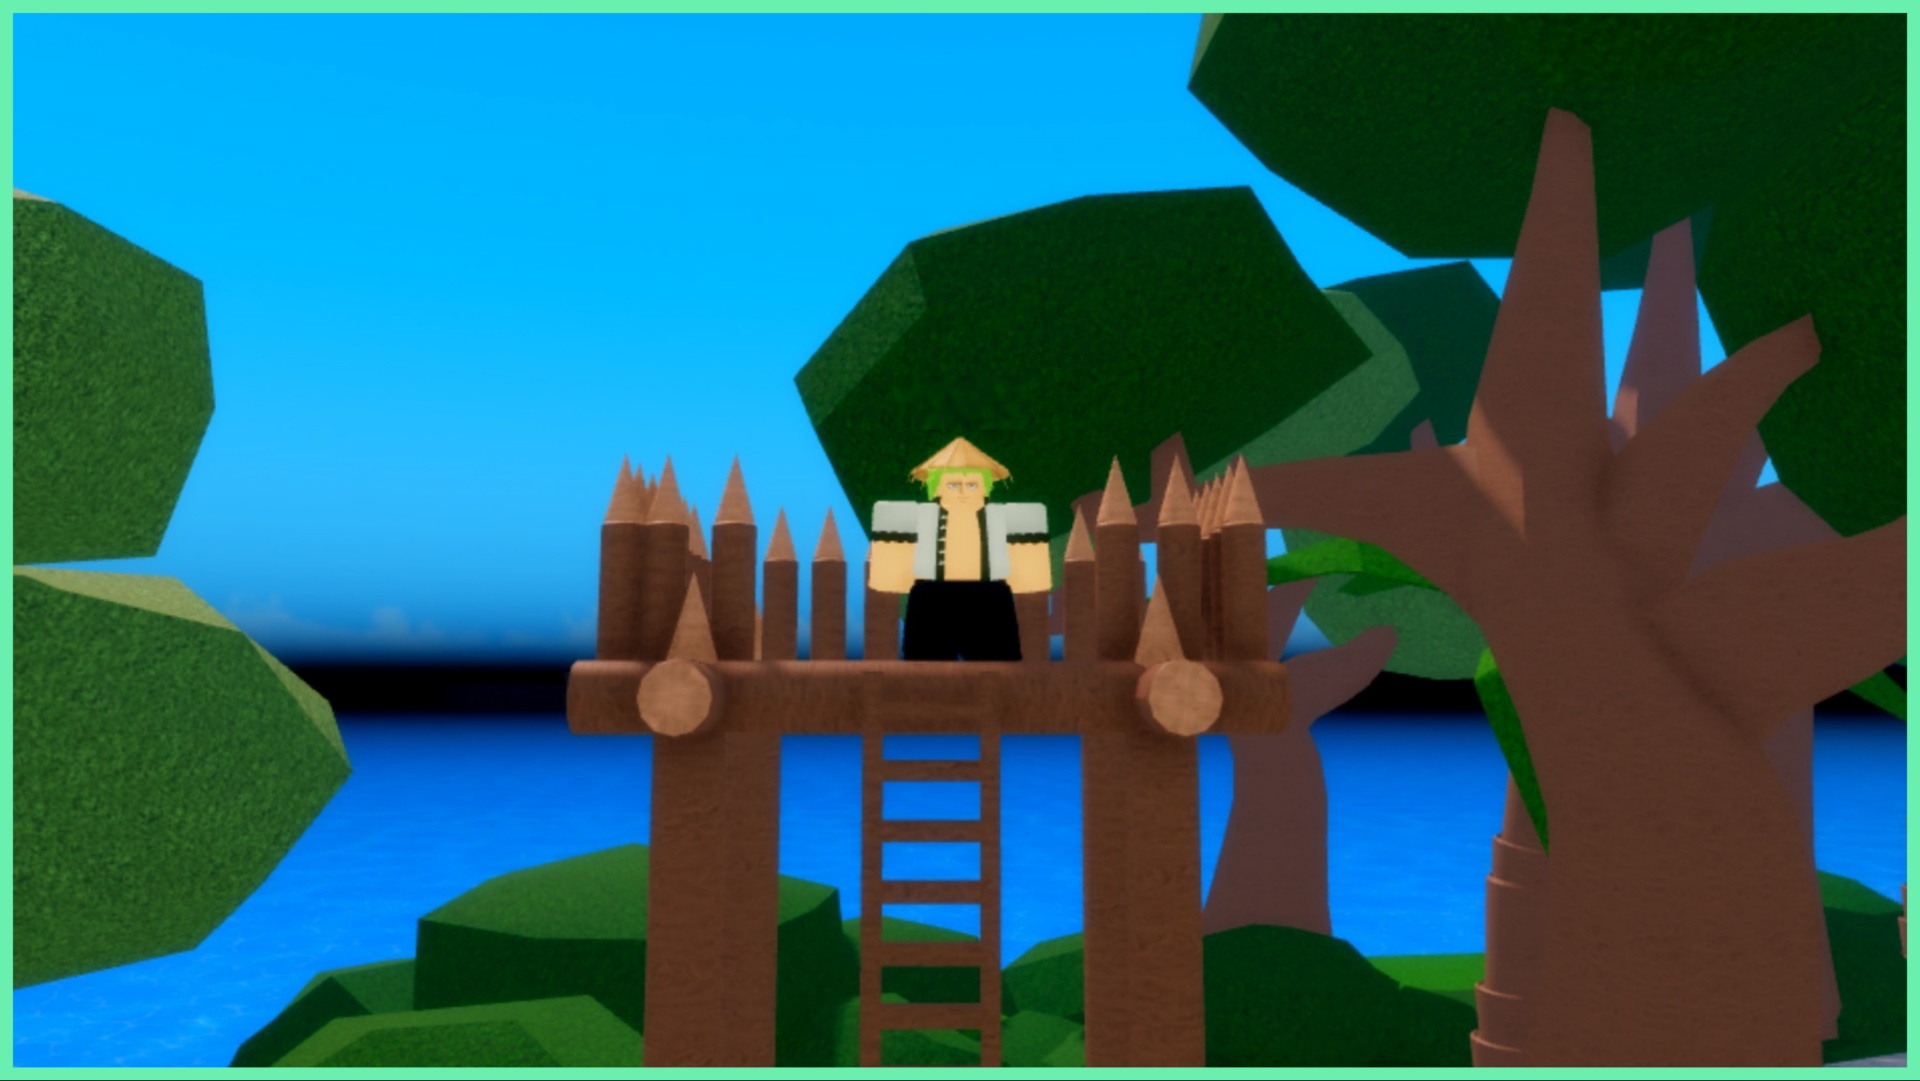 Feature image for our Legacy Piece Smoke Fruit Guide showing an avatar dressed vaguely as Zoro from One Piece stood atop a wooden overlook with wooden spiked pillar around the edges